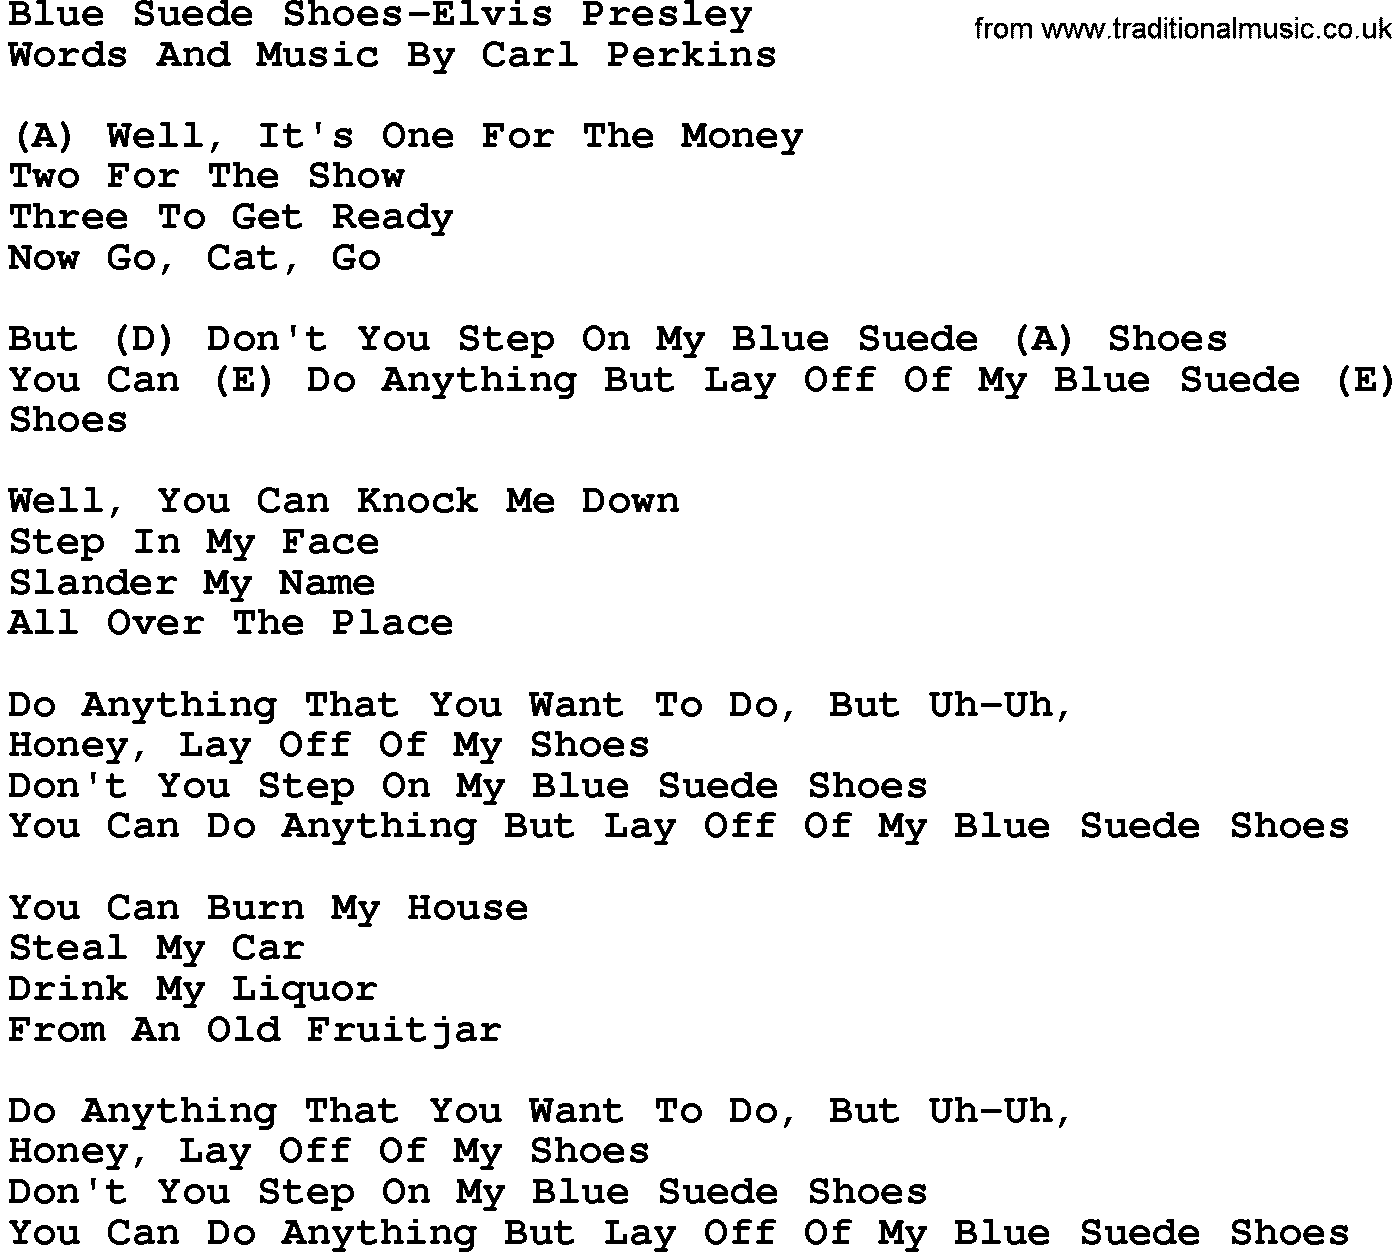 Country music song: Blue Suede Shoes-Elvis Presley lyrics and chords